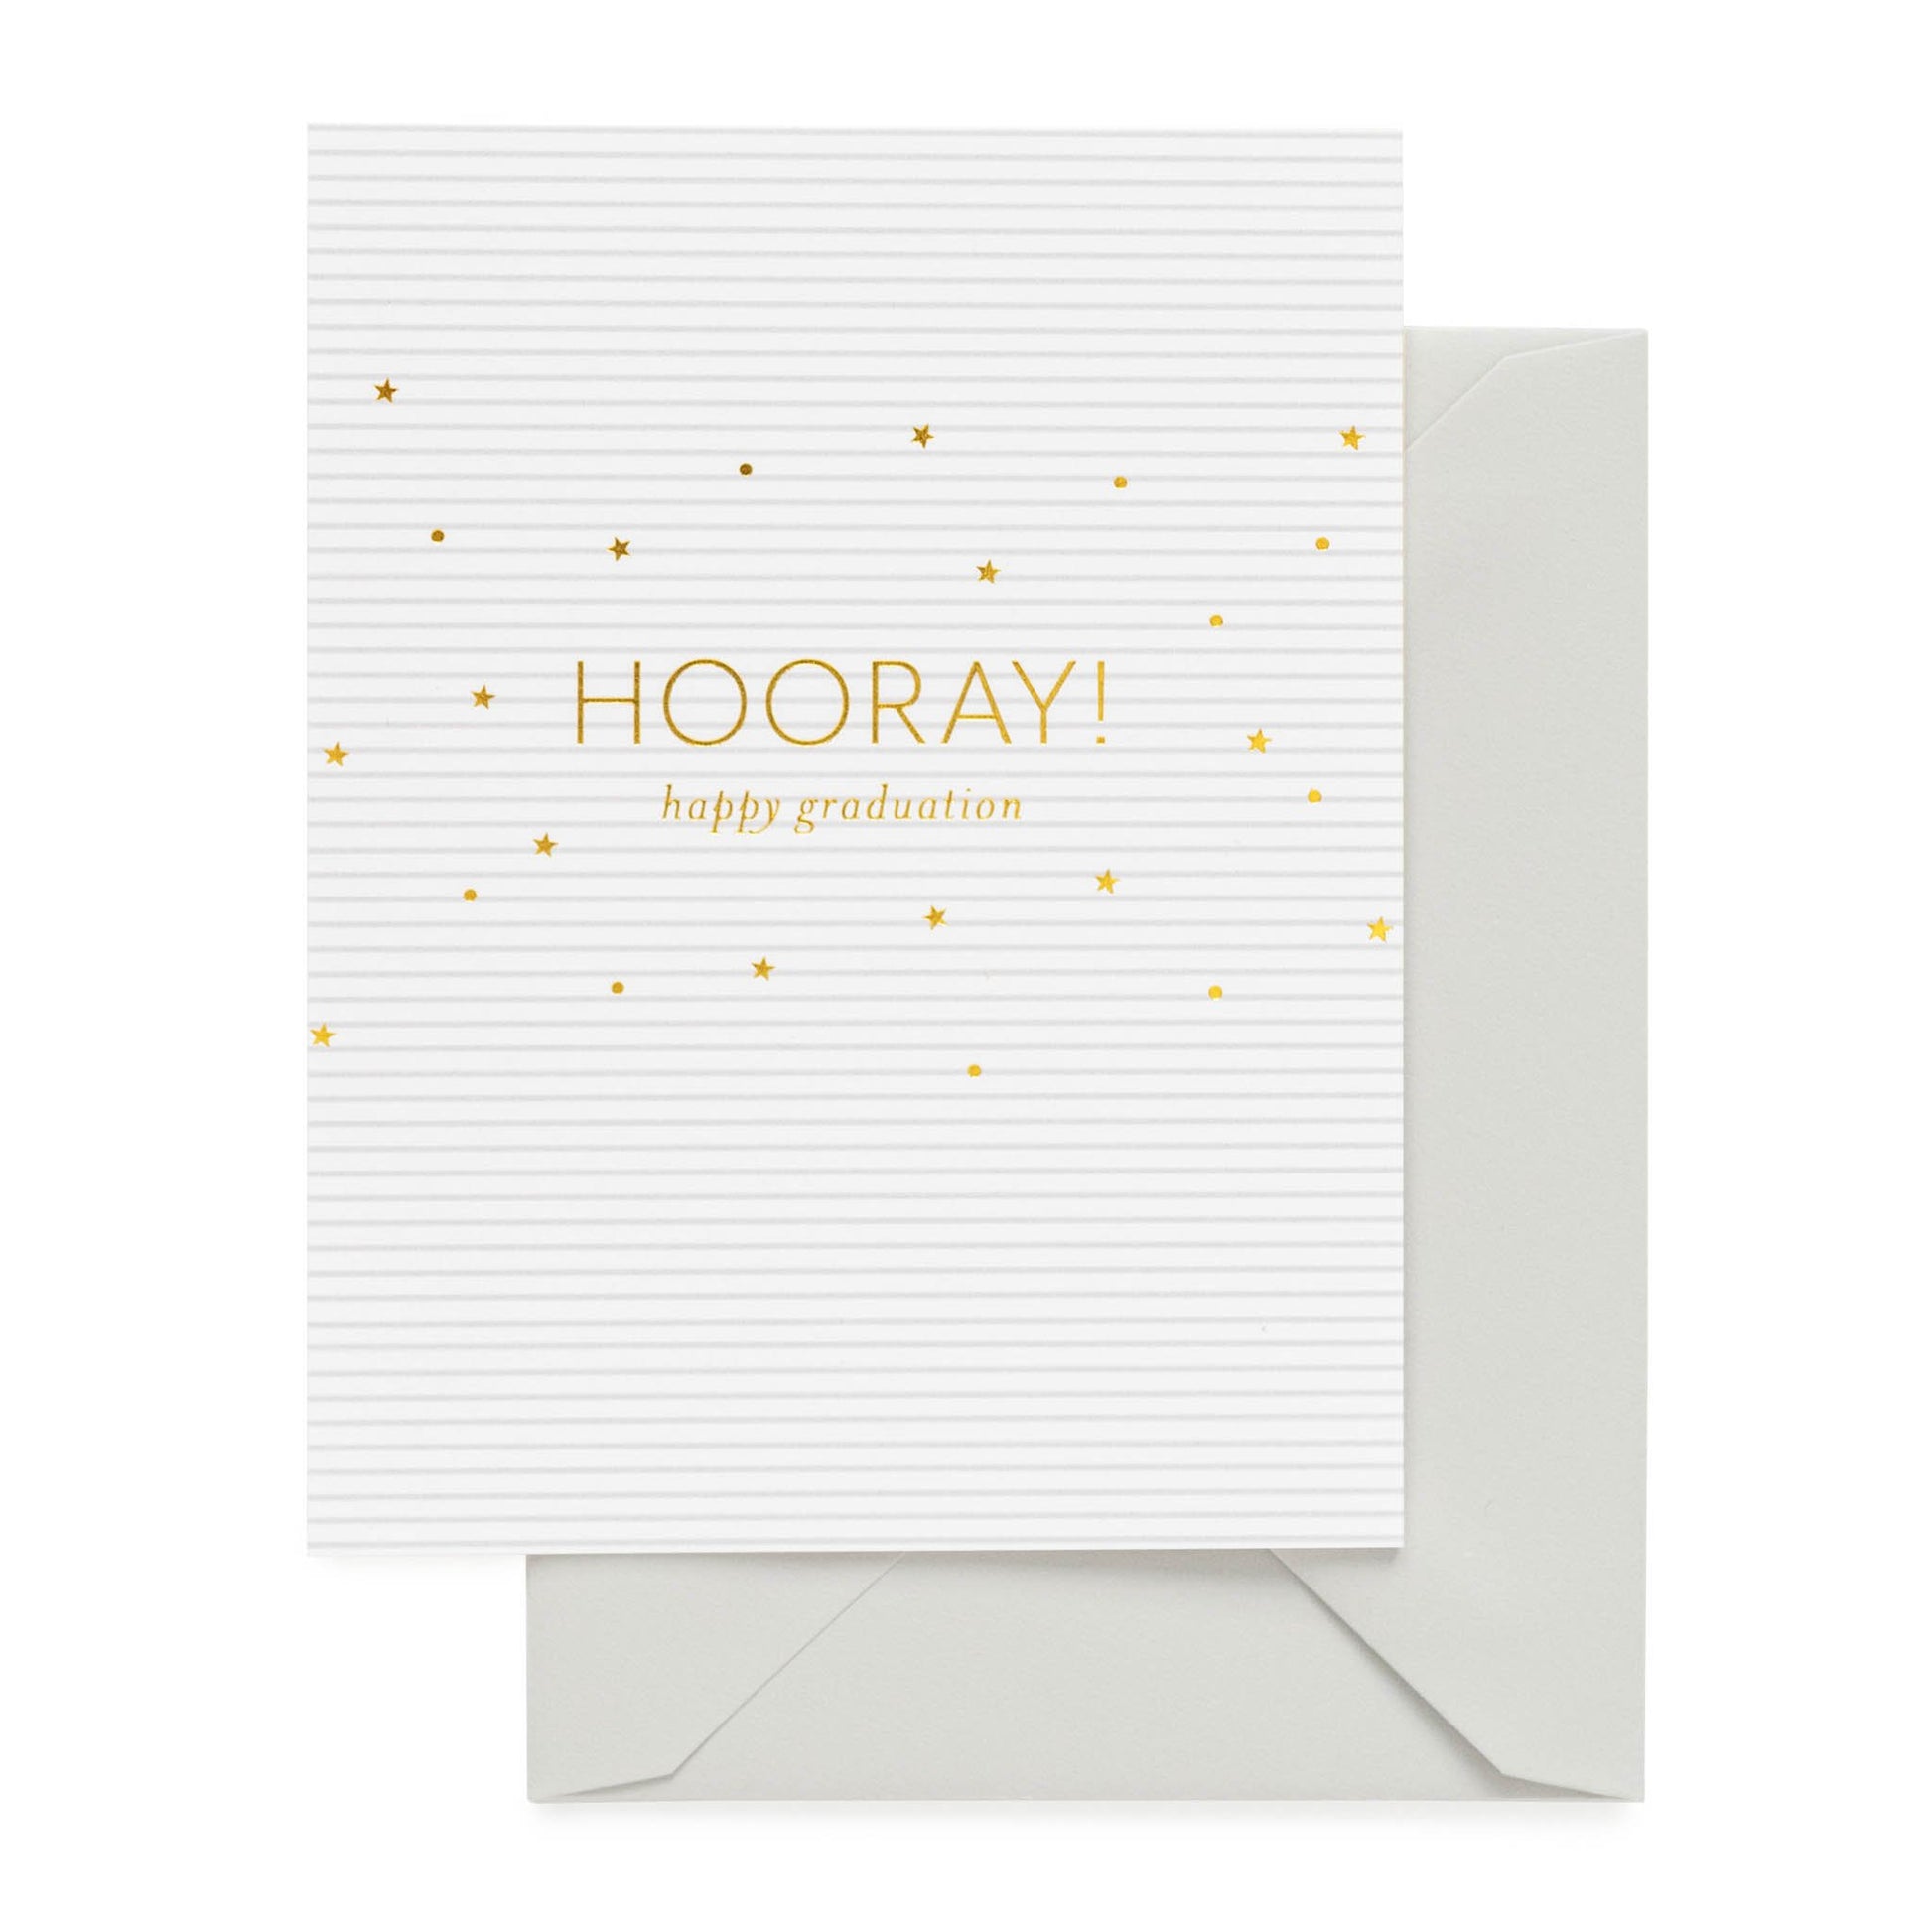 Grey stripe card printed in gold foil with Hooray! Happy graduation